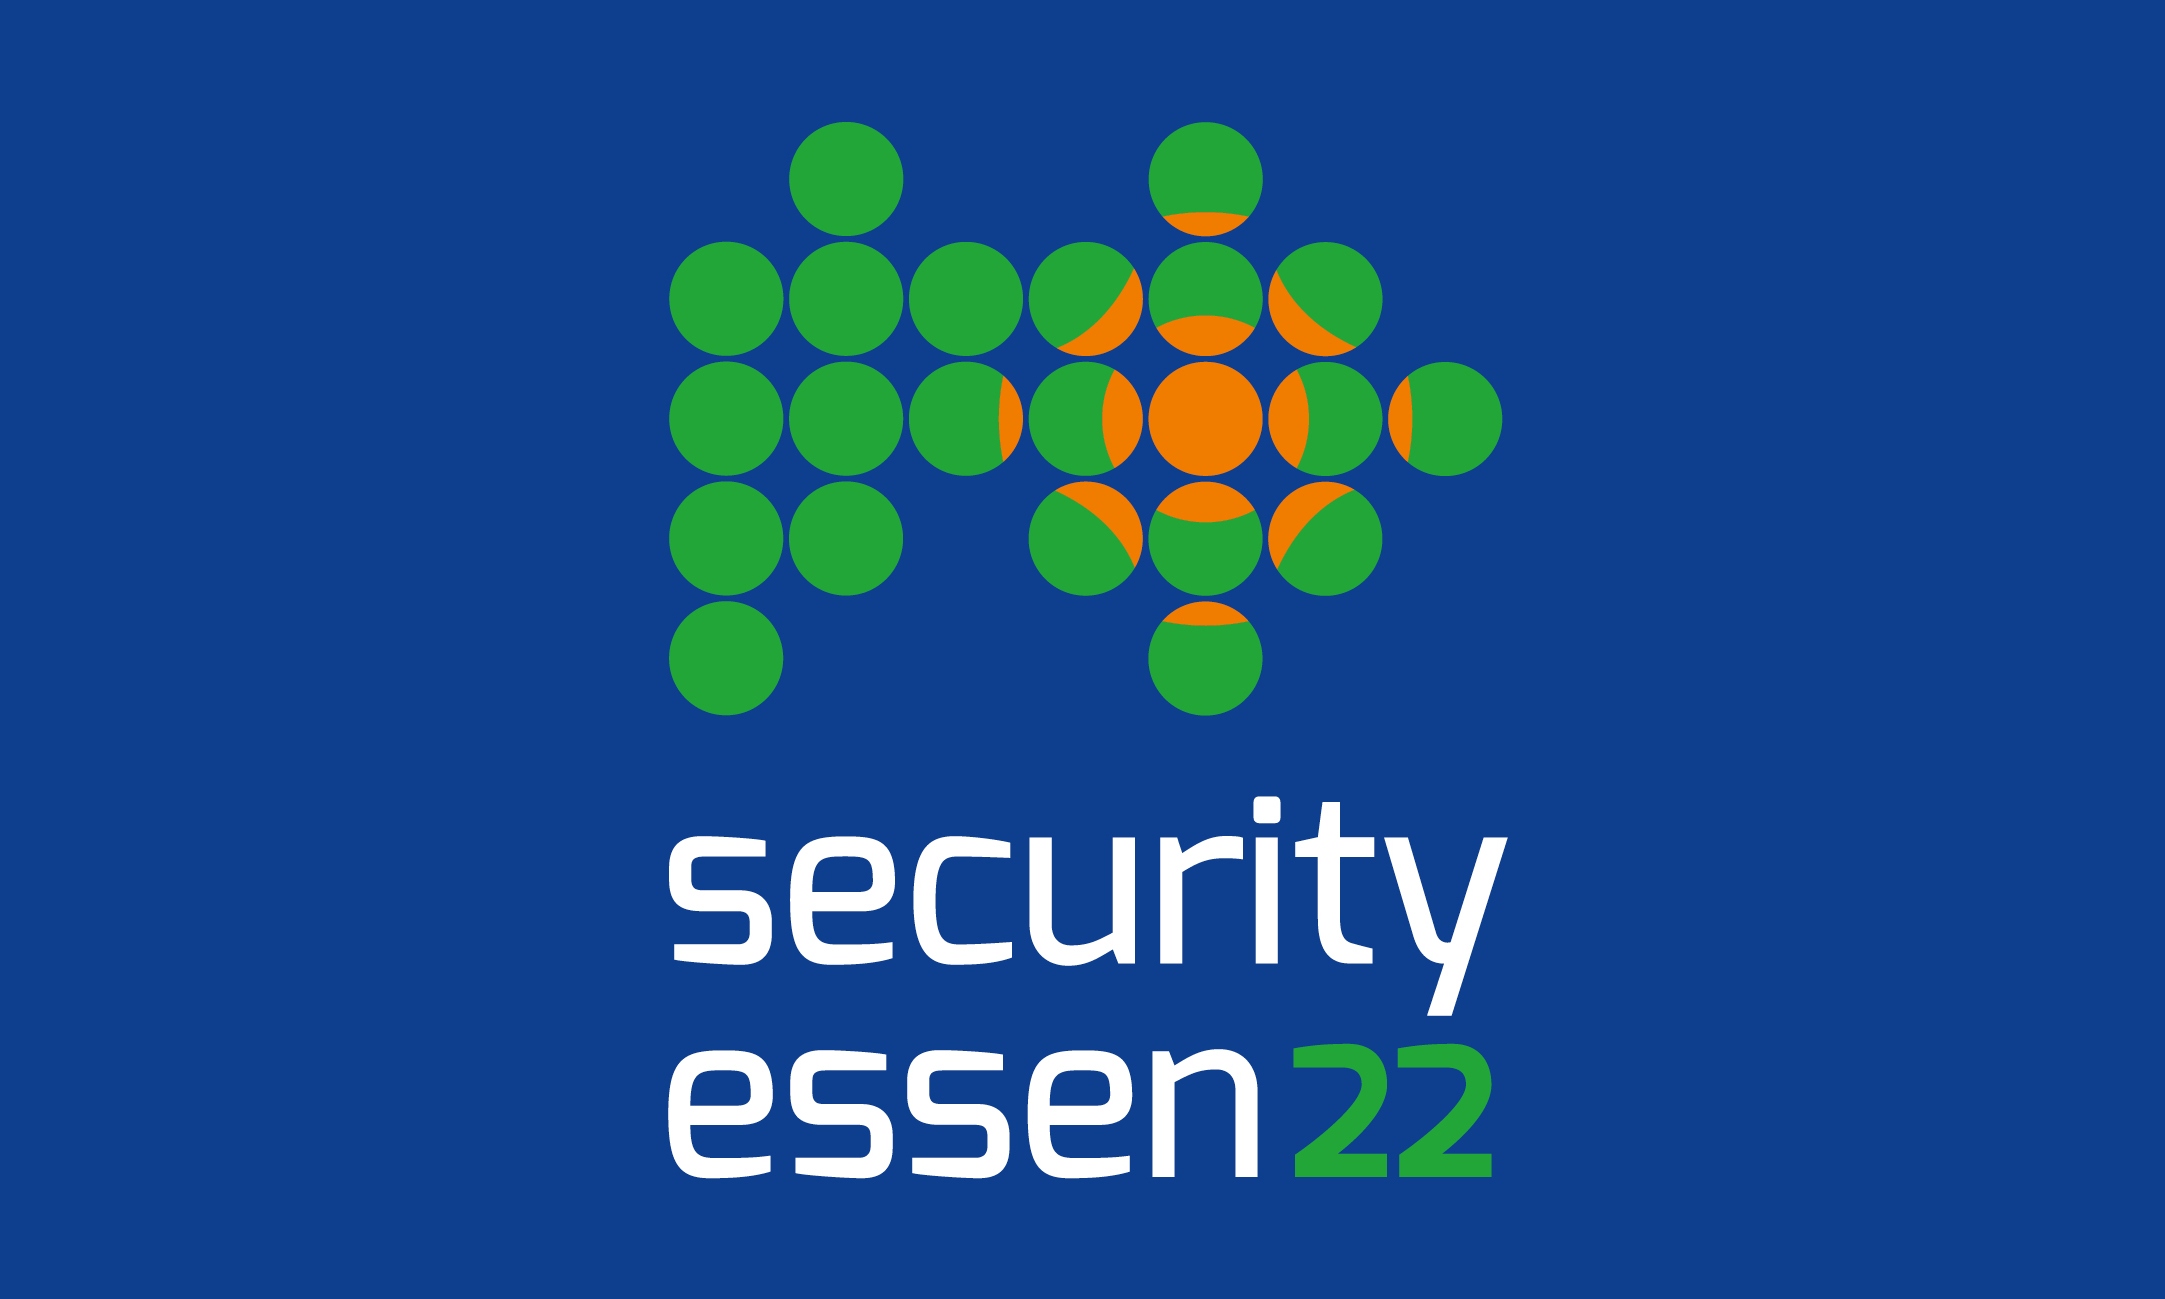 Network Security is top topic at the BeNeLux Day